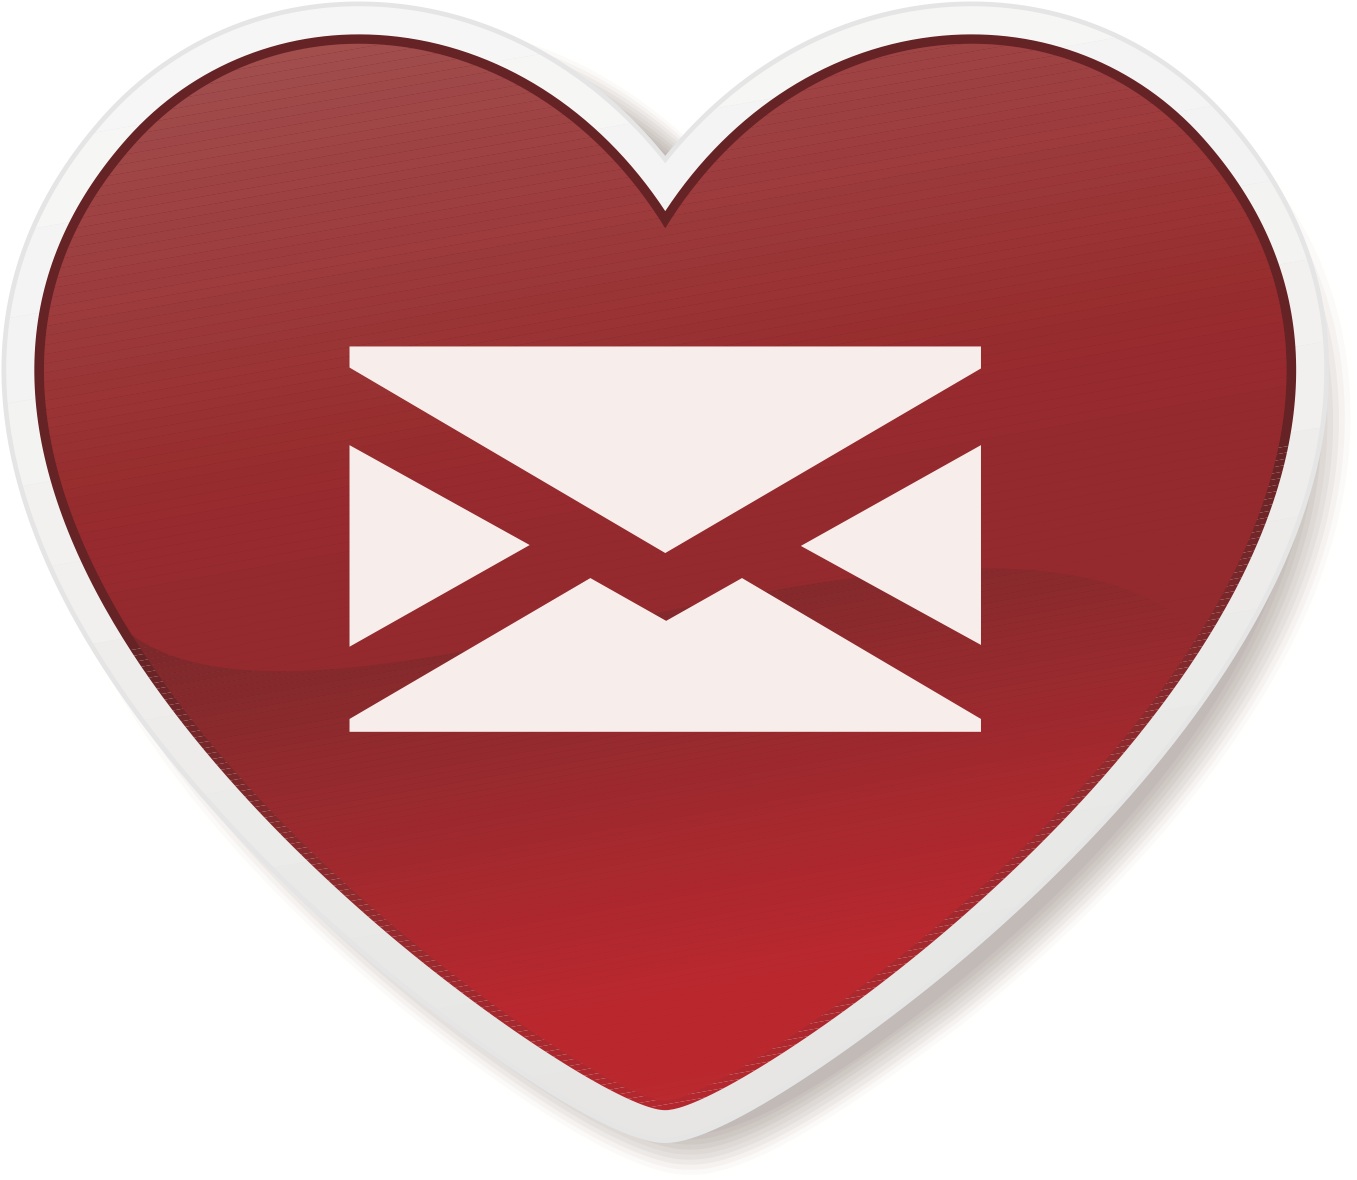 engagement con e-mail marketing